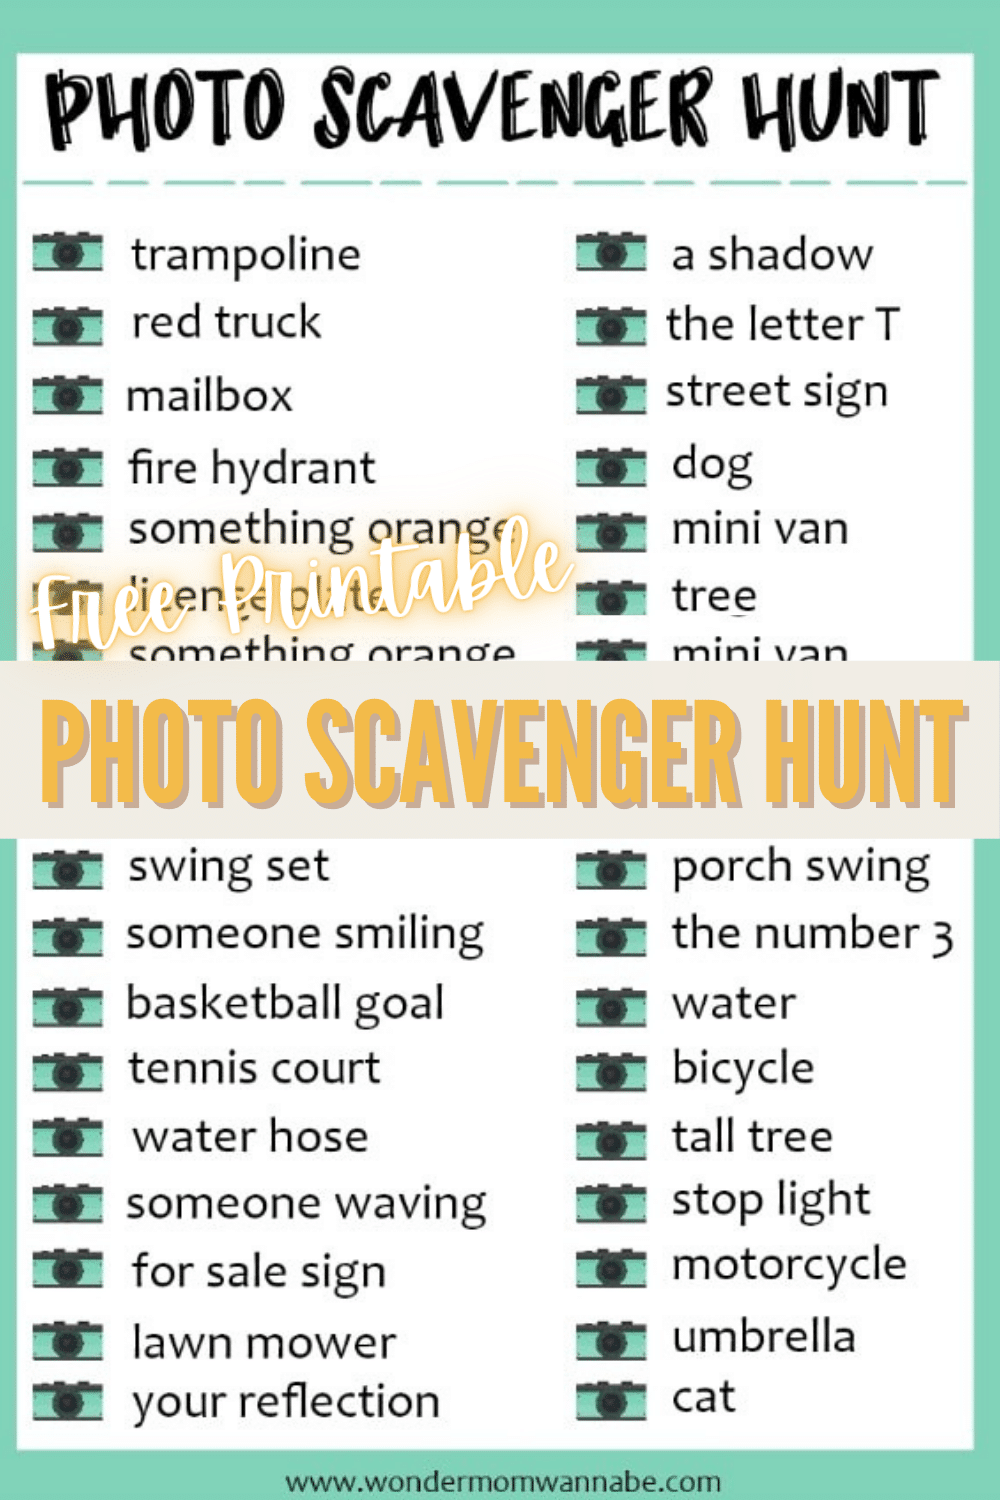 A photo scavenger hunt is a great activity for kids and adults. You can print off this free printable photo scavenger hunt list and play over and over. #scavengerhunt #printables #activitiesforkids via @wondermomwannab